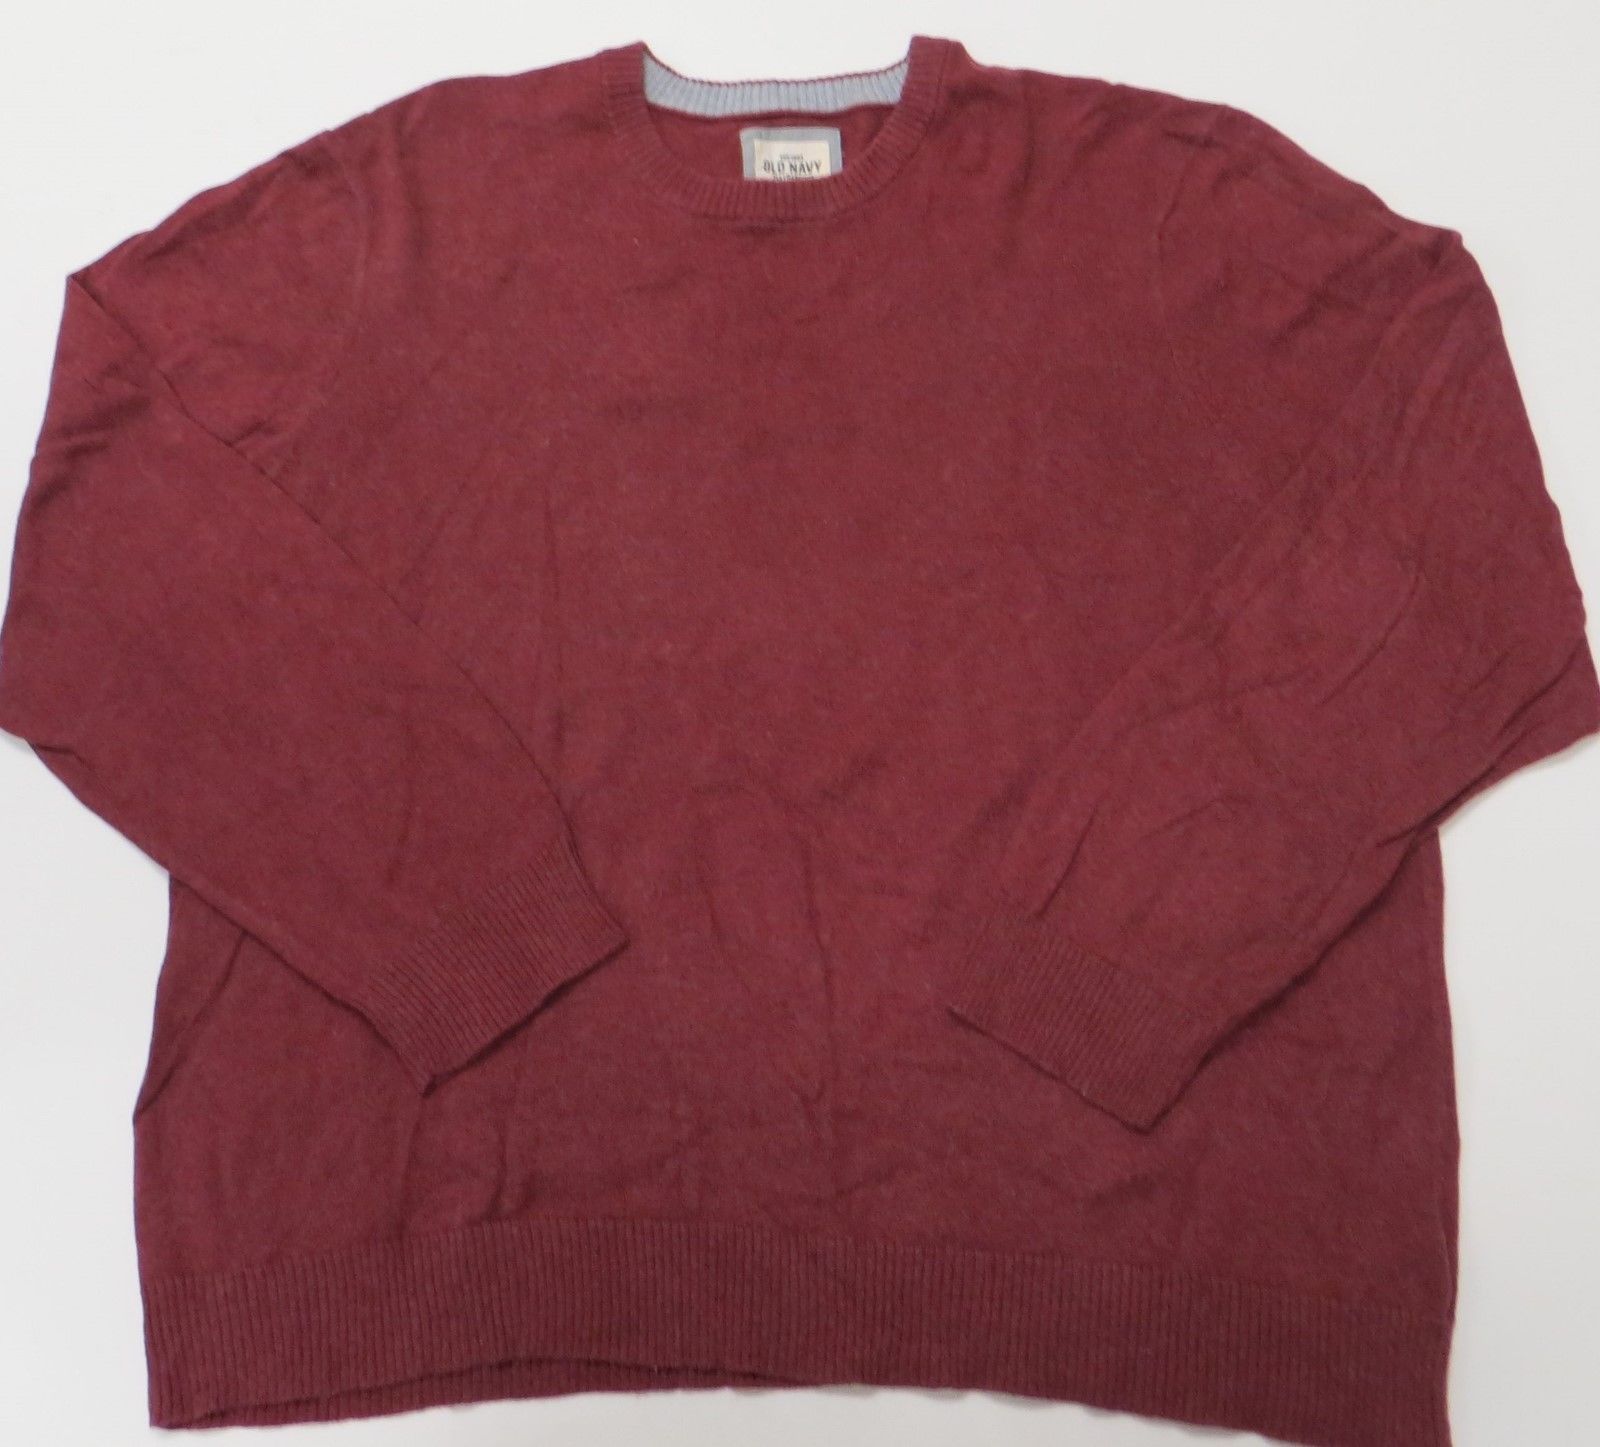 Old Navy Sweater Mens XXL Red 2XL Crew Neck Cotton Cashmere - Sweaters